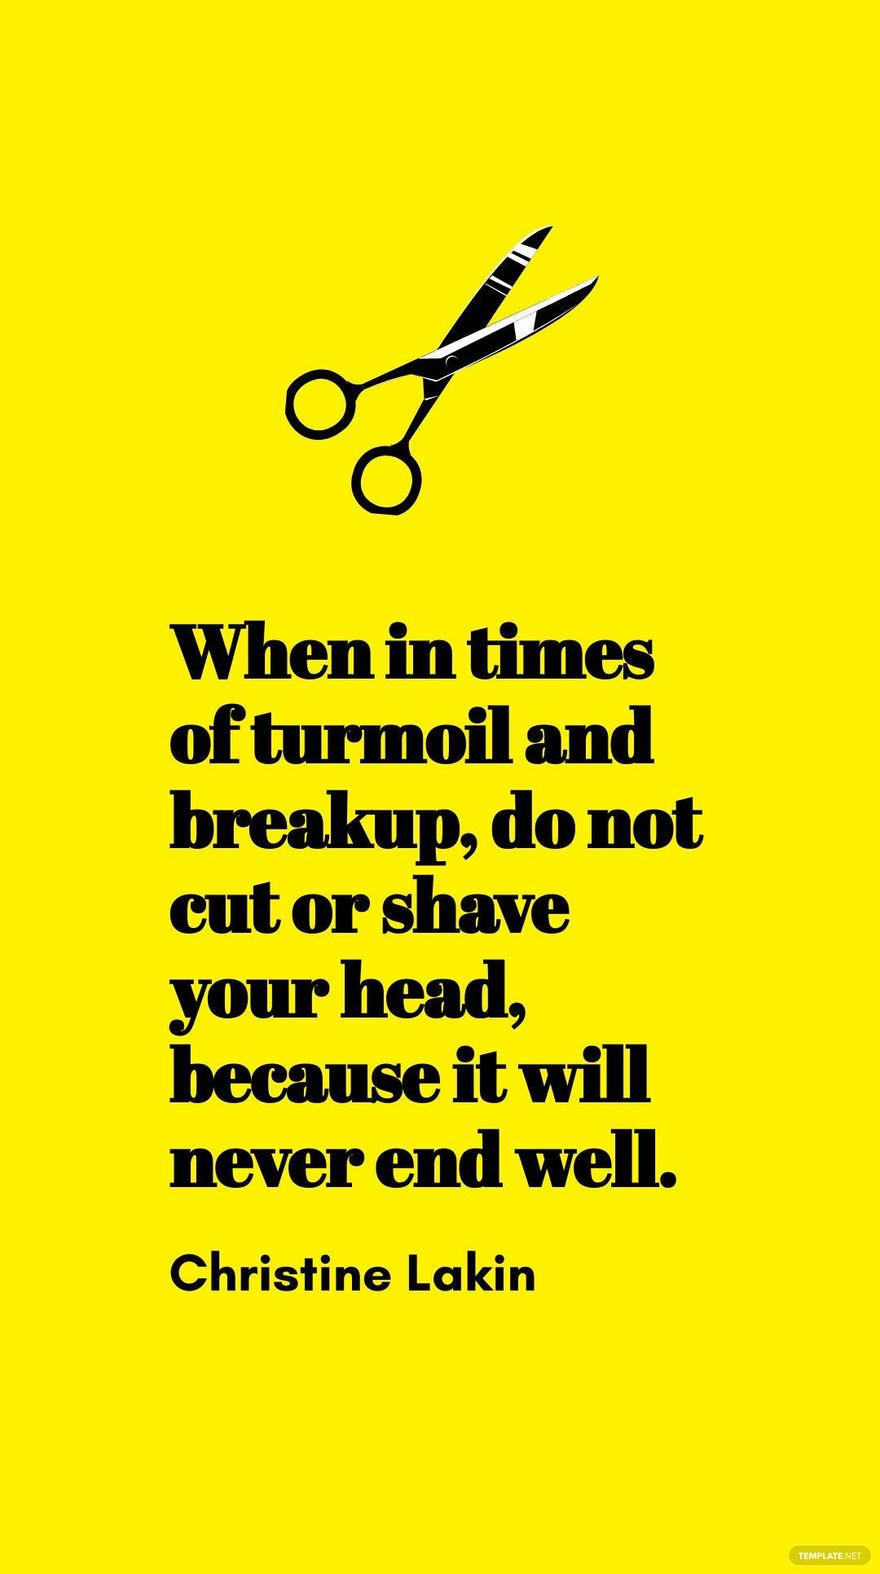 Christine Lakin - When in times of turmoil and breakup, do not cut or shave your head, because it will never end well. in JPG